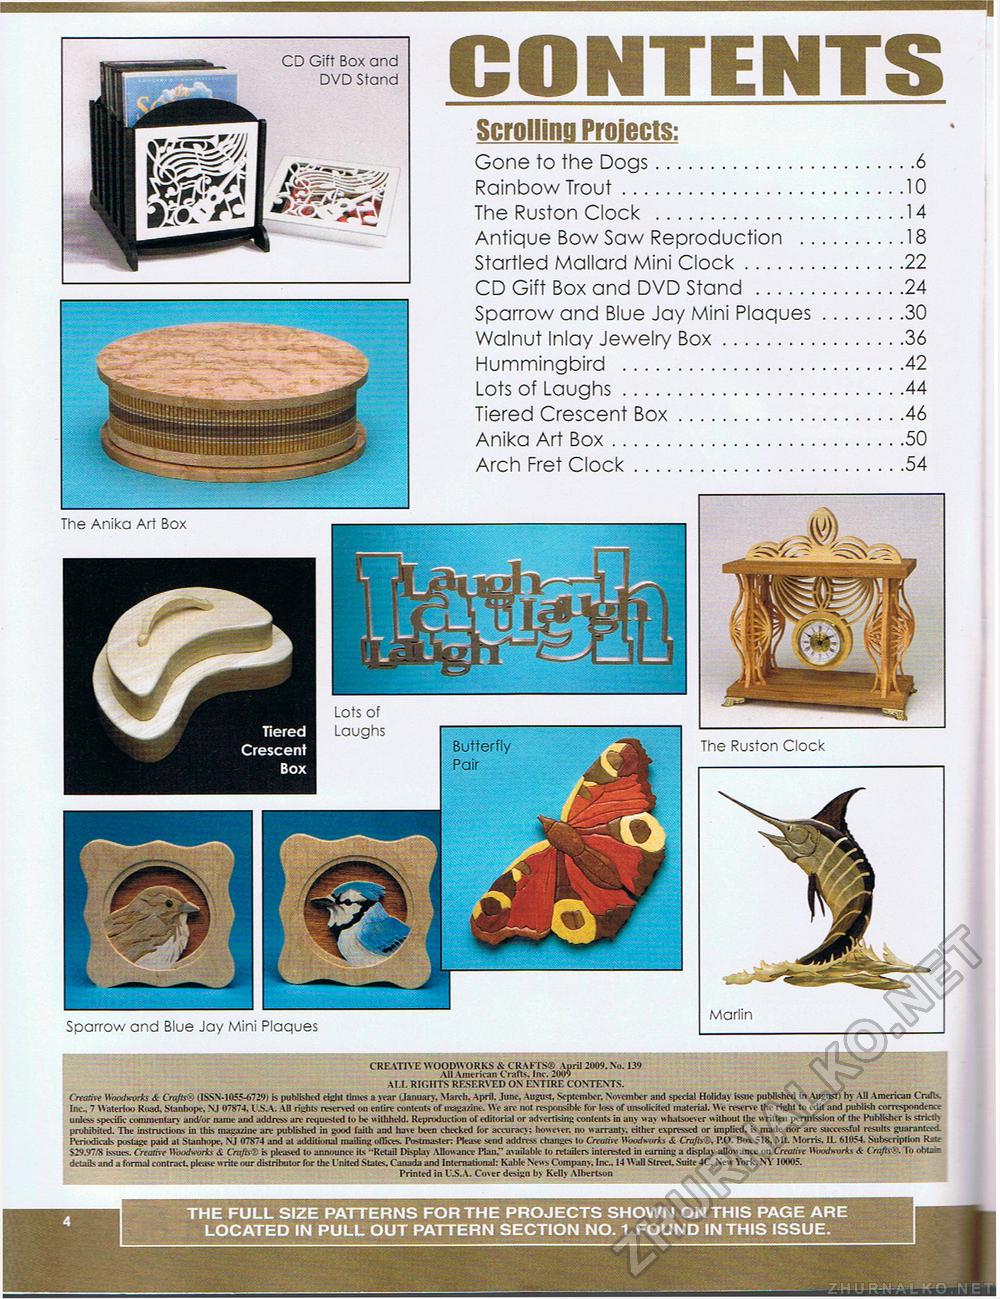 contents! - Creative Woodworks & crafts 2009-04, страница 4